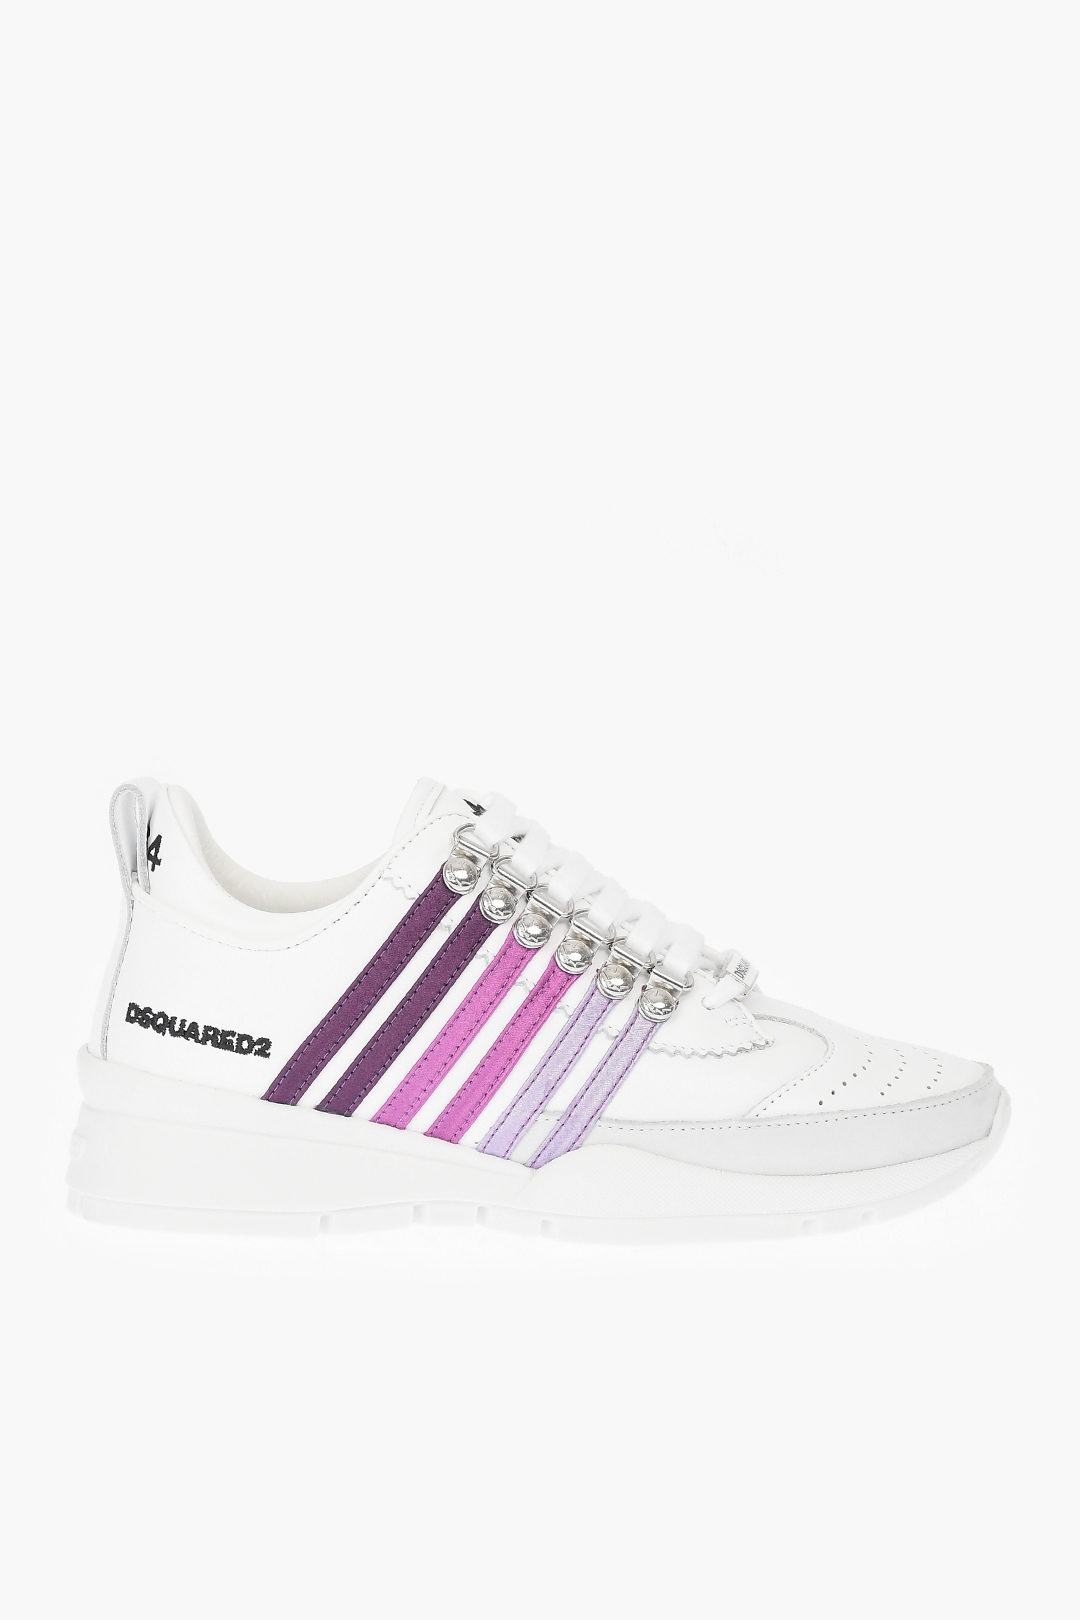 Uil Extractie Brig Dsquared2 contrasting details leather sneakers women - Glamood Outlet